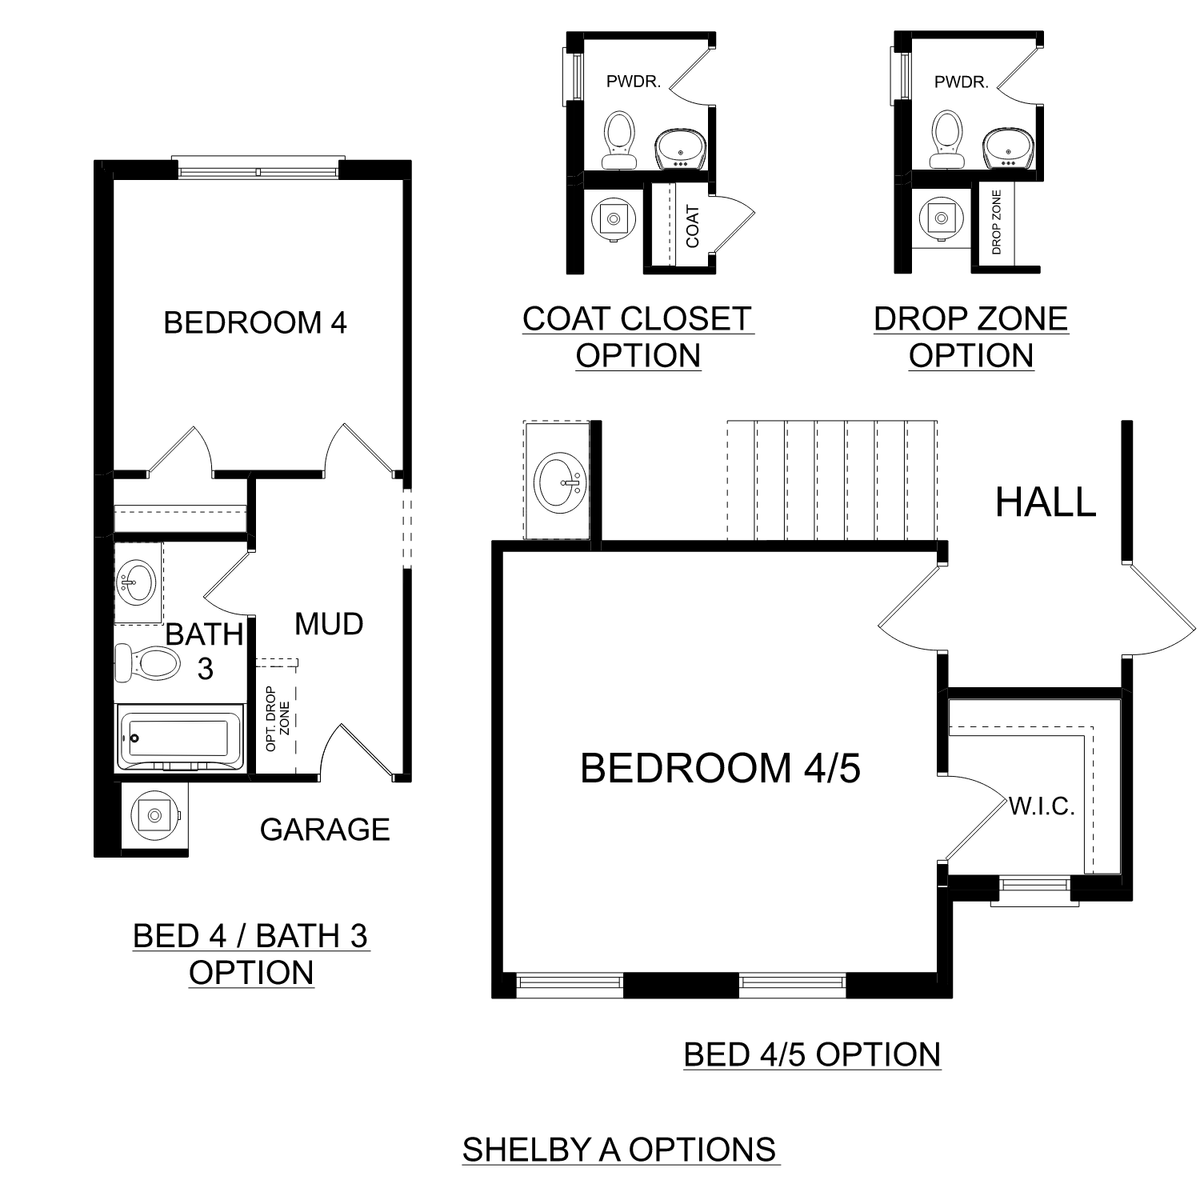 3 - The Shelby A buildable floor plan layout in Davidson Homes' Creek Grove community.